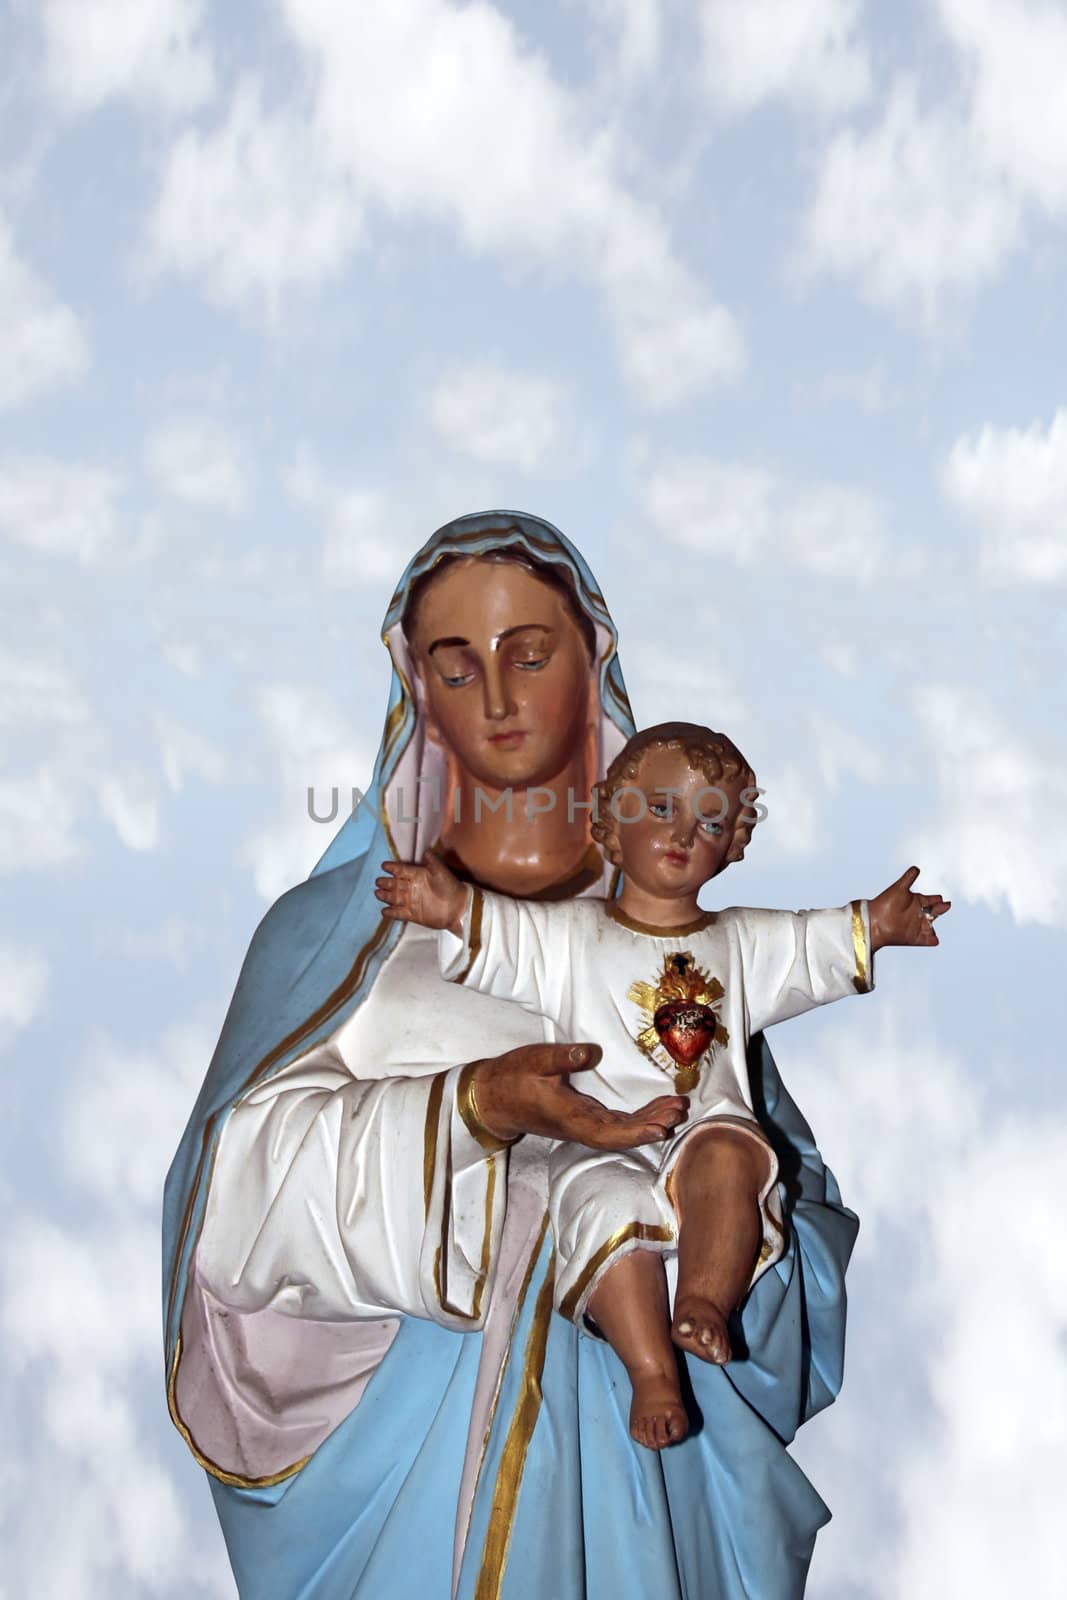 statue of the virgin mary holding jesus christ as a baby with a clipping path